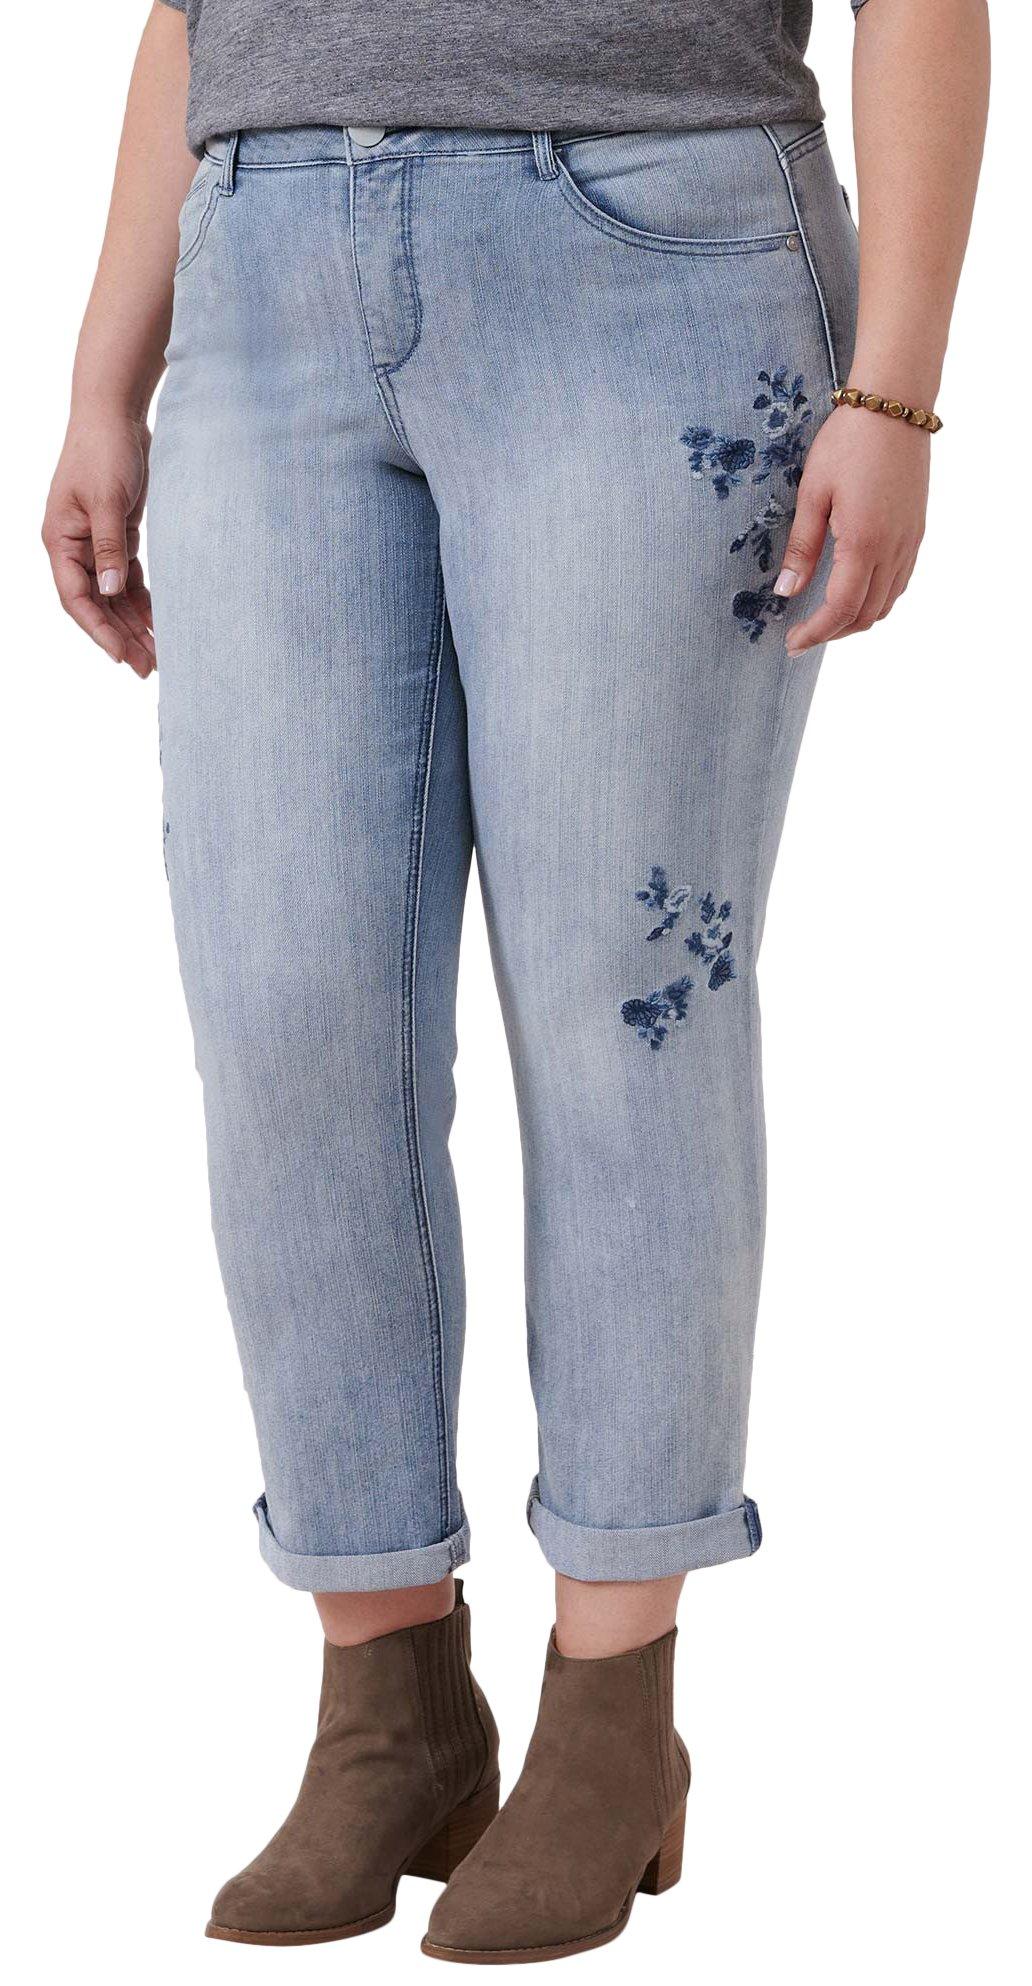 Democracy Plus Ab-Tech Floral Embroidery Girlfriend Jeans